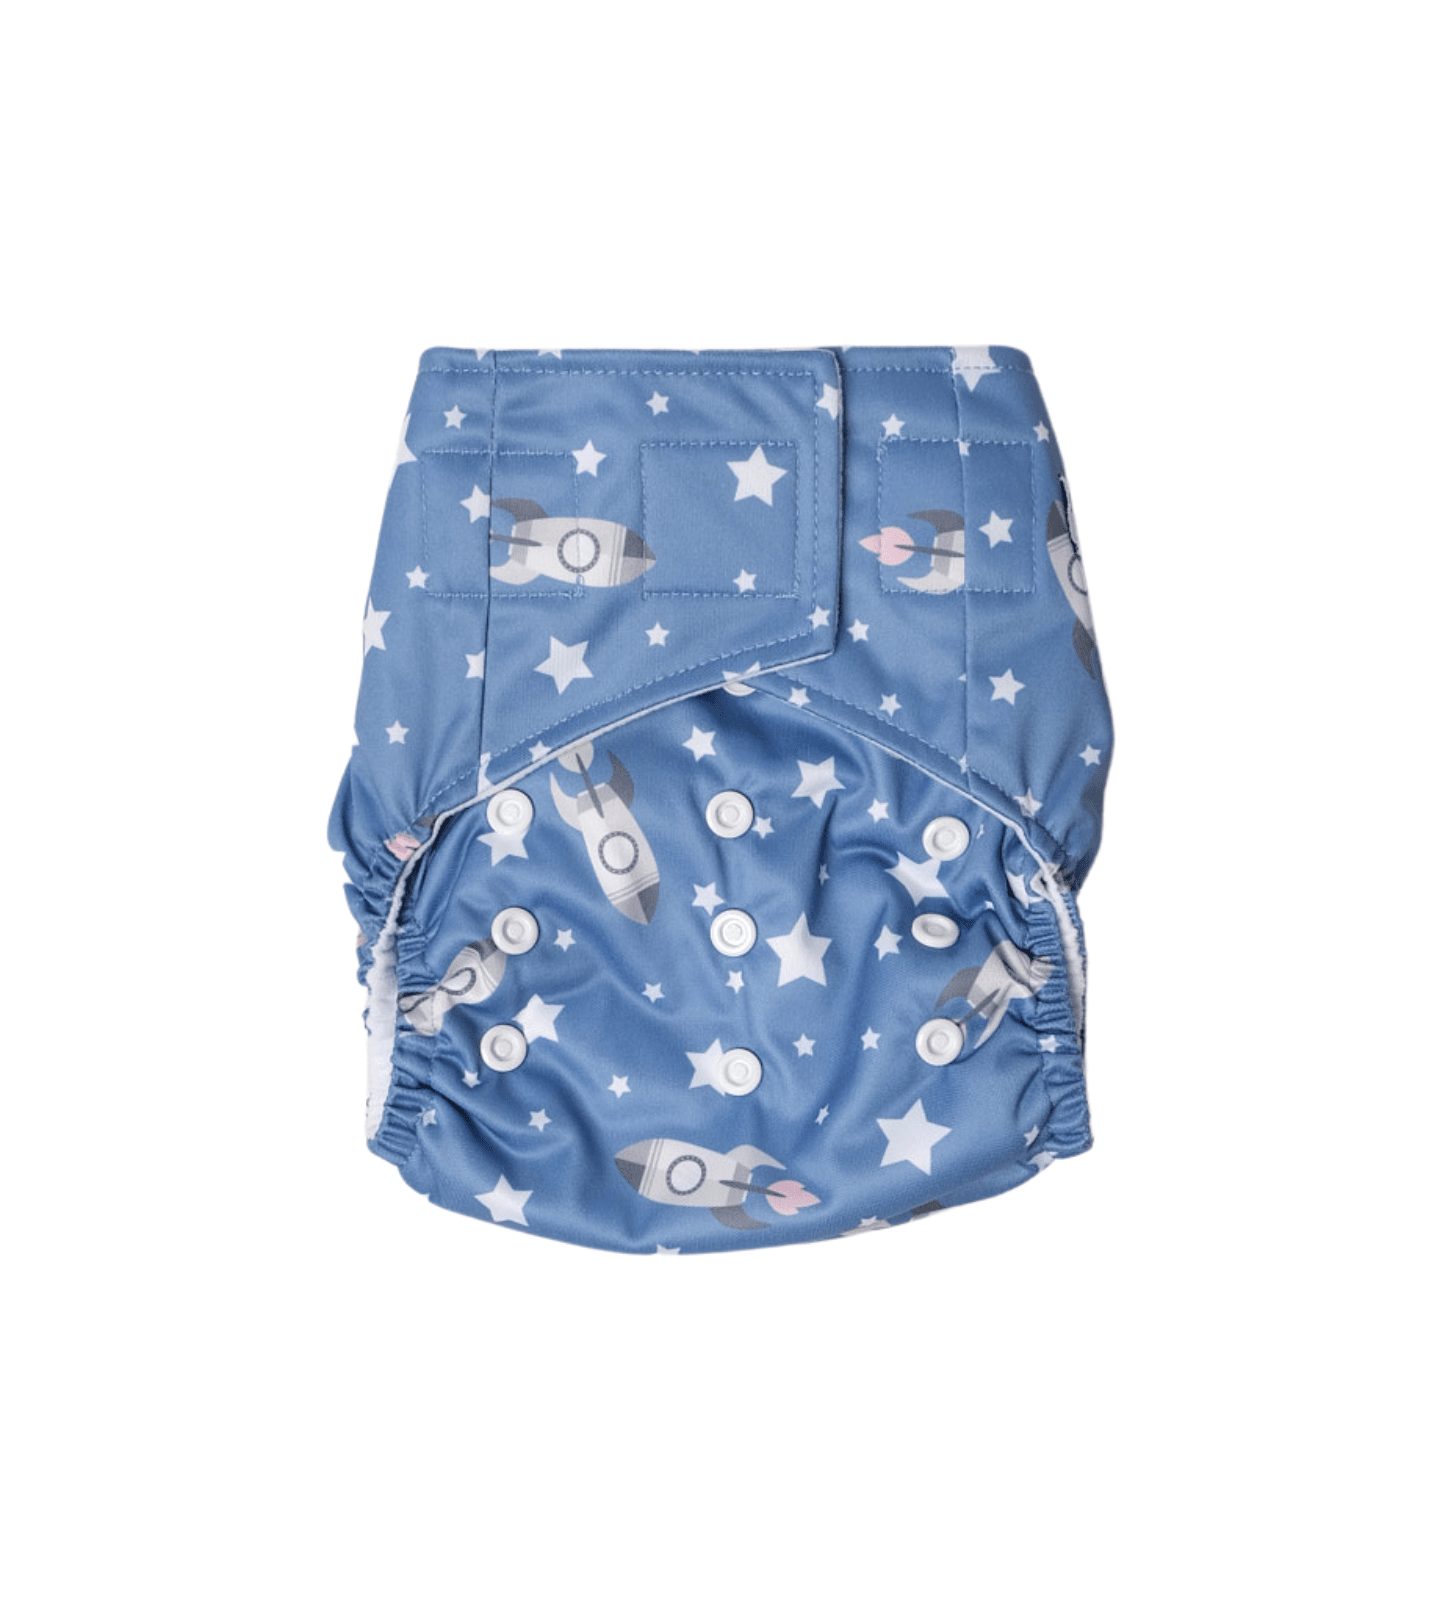 Snazzi Pants All in One Cloth Nappy - Brolly Sheets AU